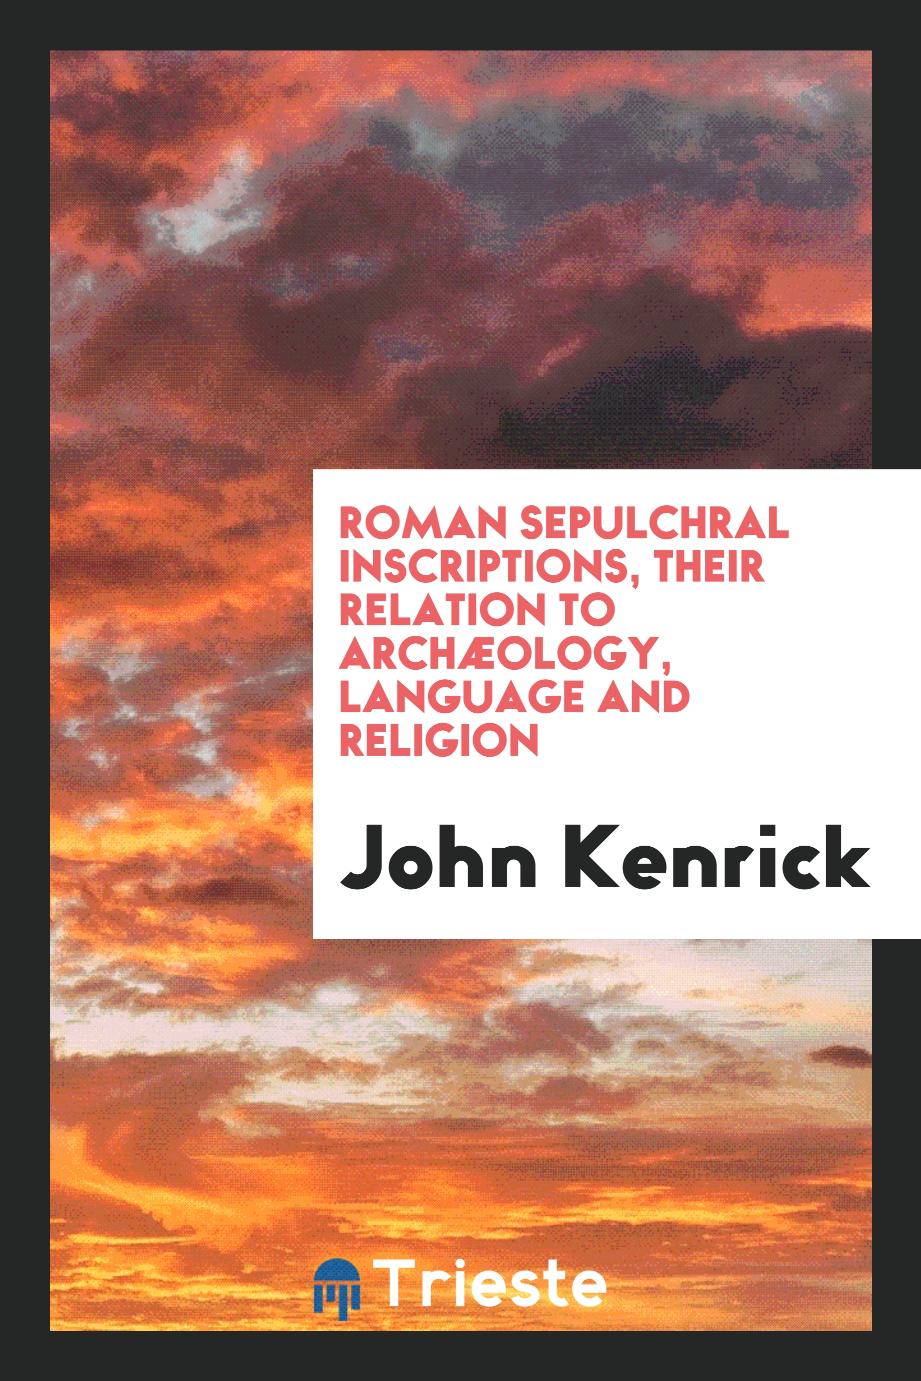 Roman sepulchral inscriptions, their relation to archæology, language and religion